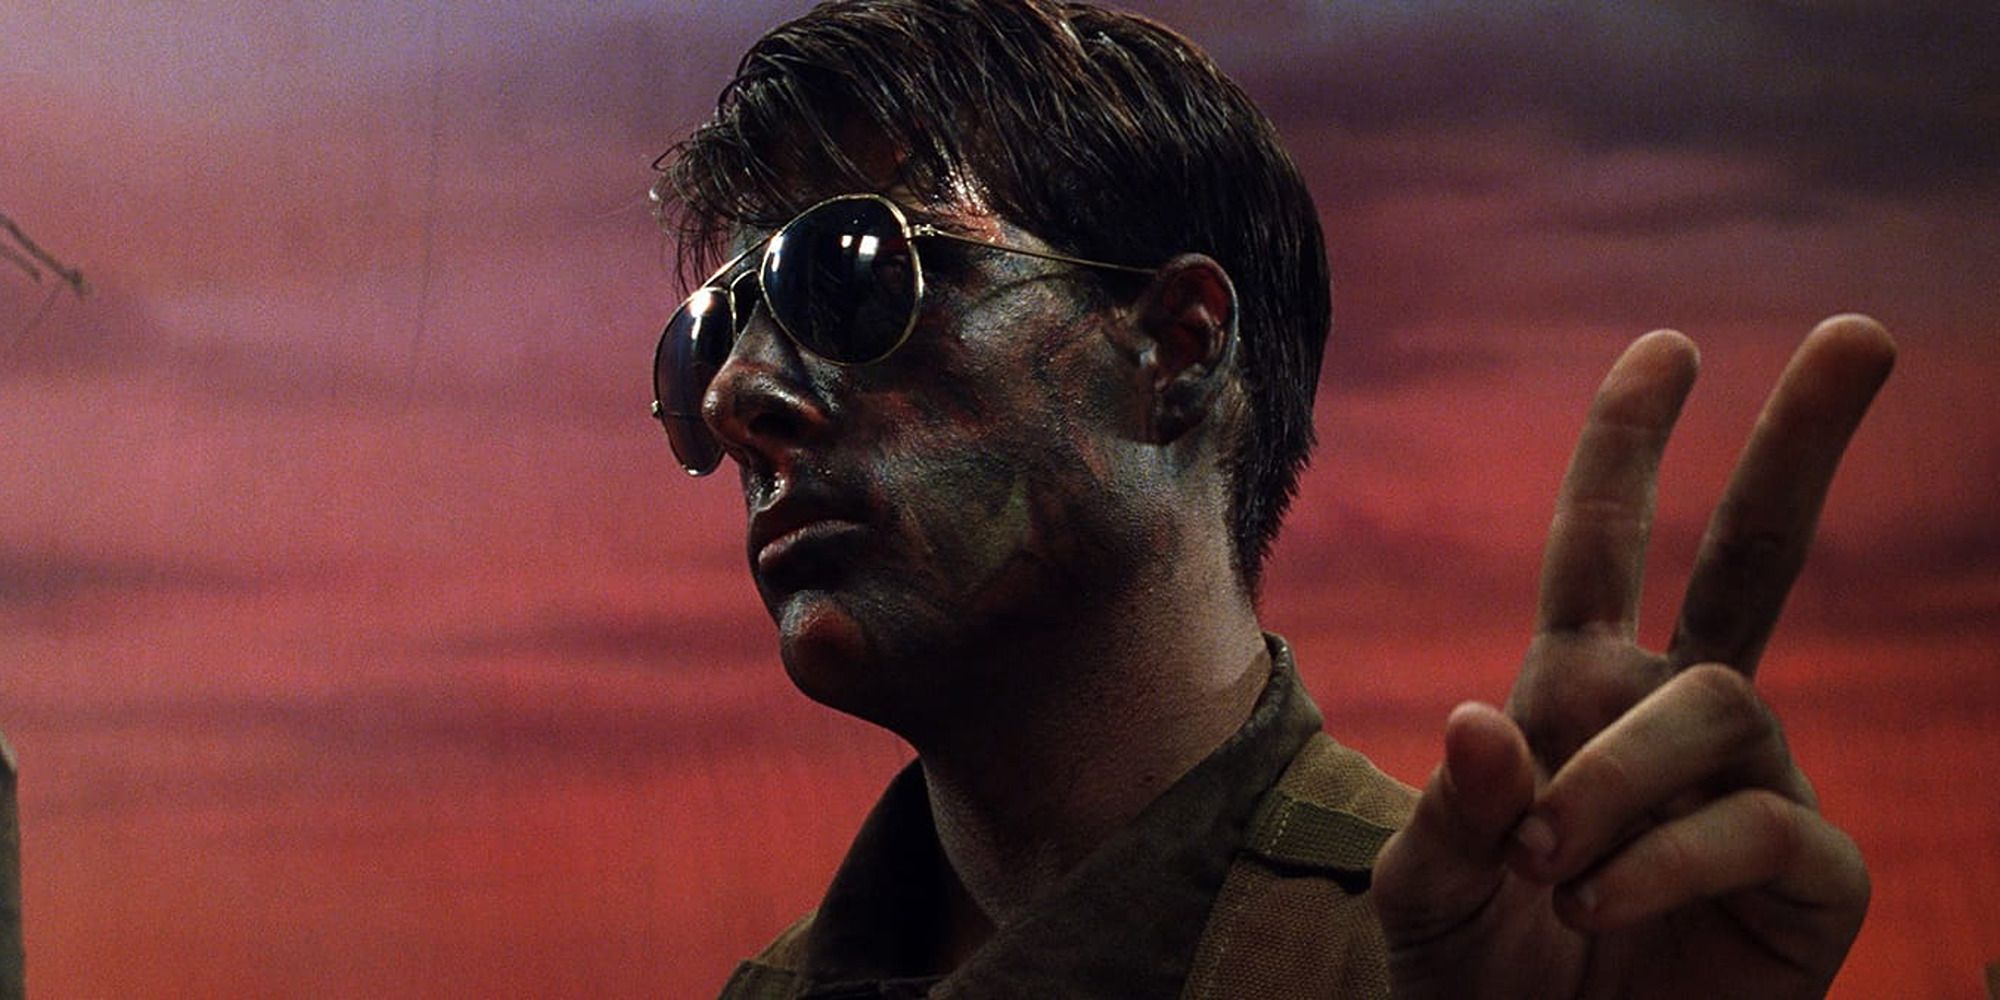 man with sunglasses and war paint on his face, doing peace sign